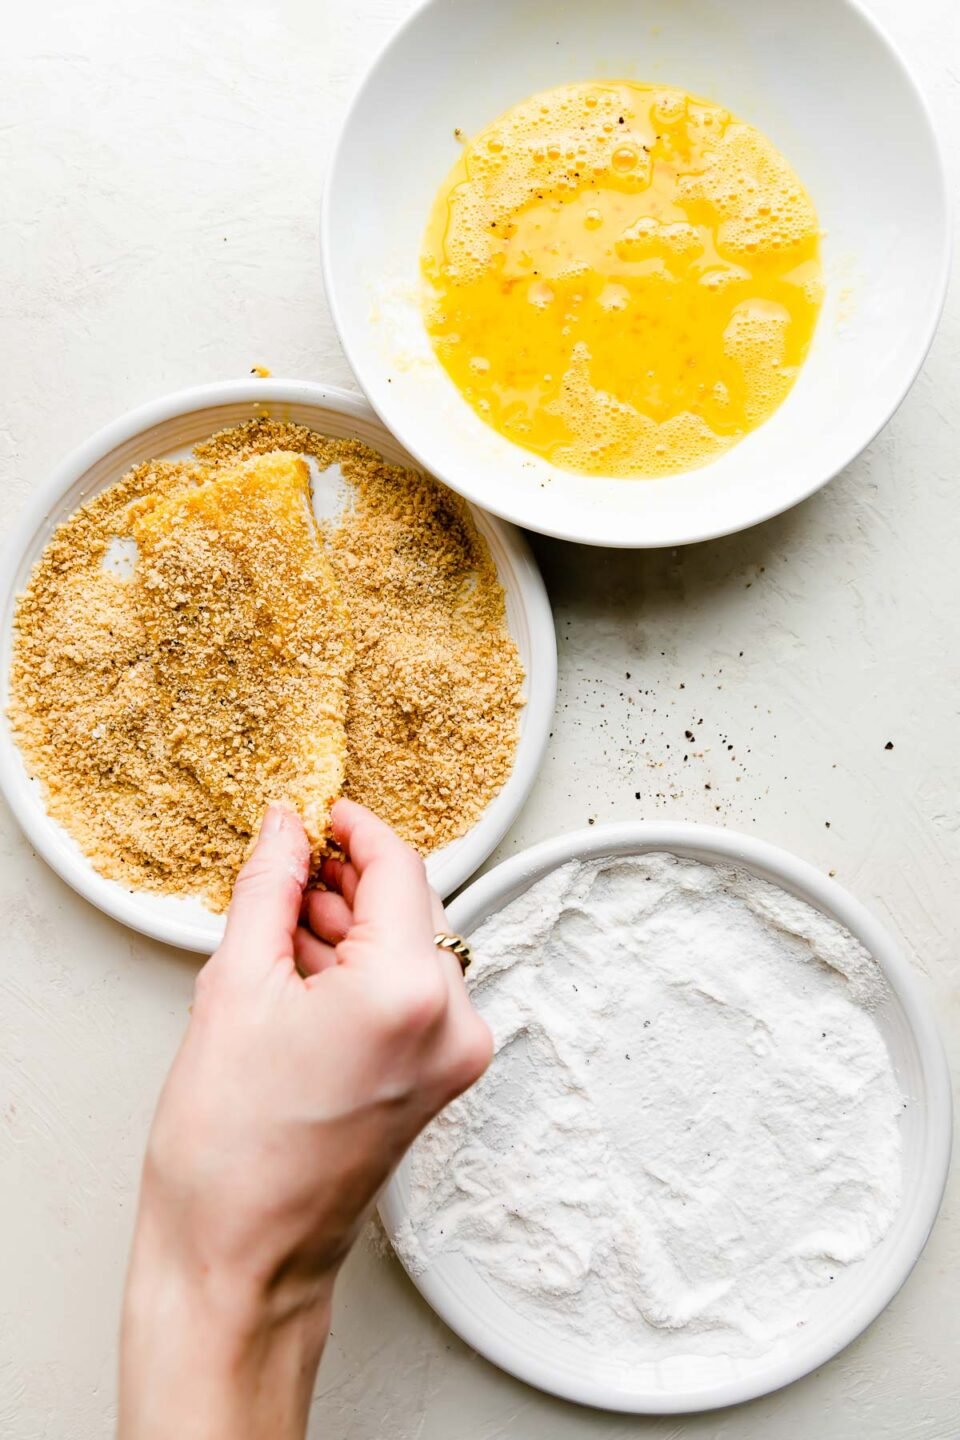 An overhead shot of a prepared dredging station for fish fry: a white plateful of rice flour, a second white plateful of panko breadcrumbs, and a third shallow bowl filled with beaten eggs. A woman's hand holds a cod fish filet as she coats the filet in panko breadcrumbs.